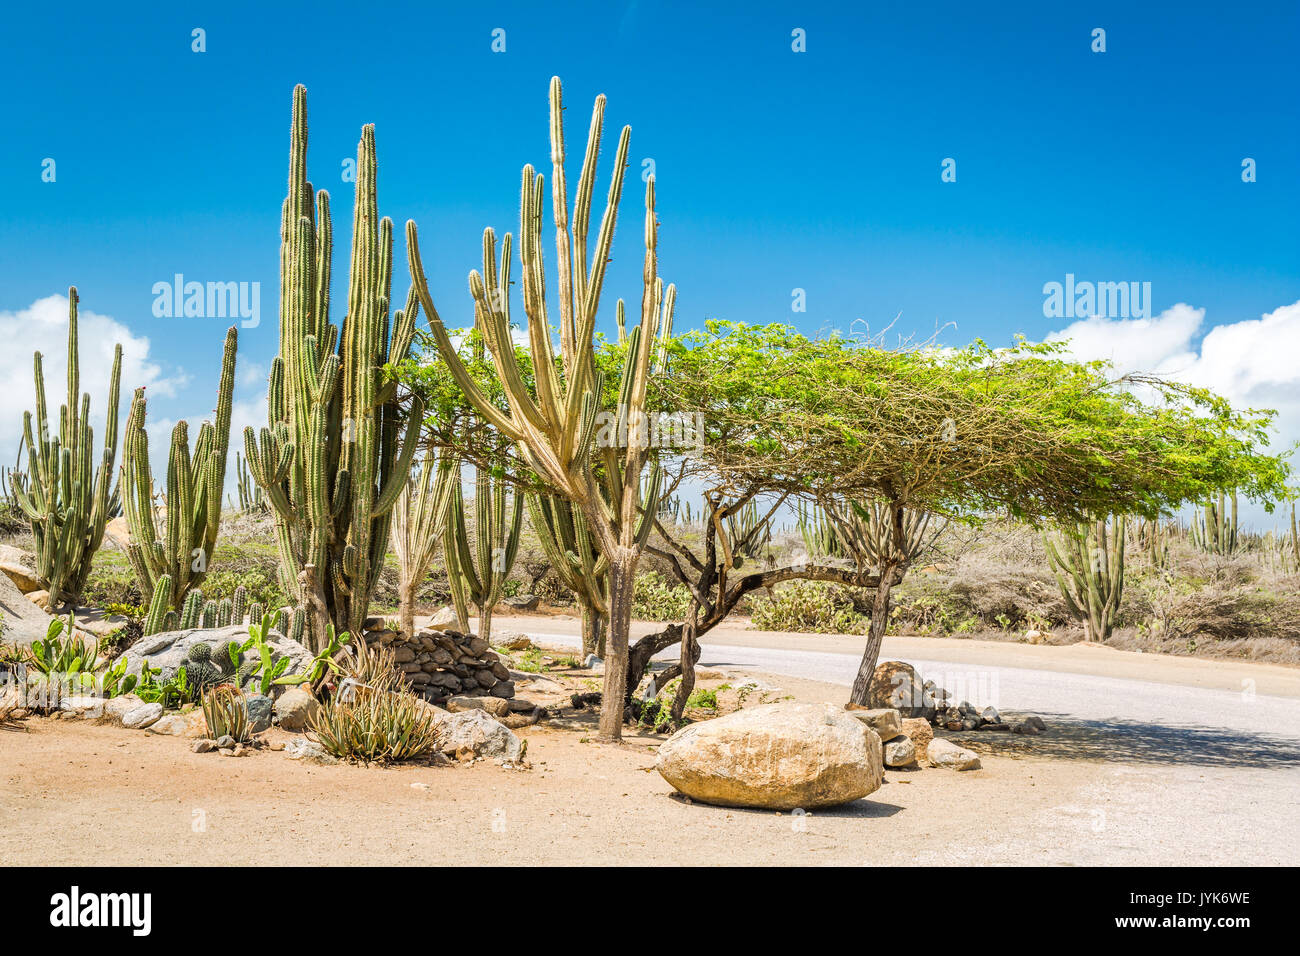 Typical dry climate cacti and shrubs in Aruba. The rural areas of the island, called kunuku, are home to various forms of cacti, thorny shrubs, and lo Stock Photo